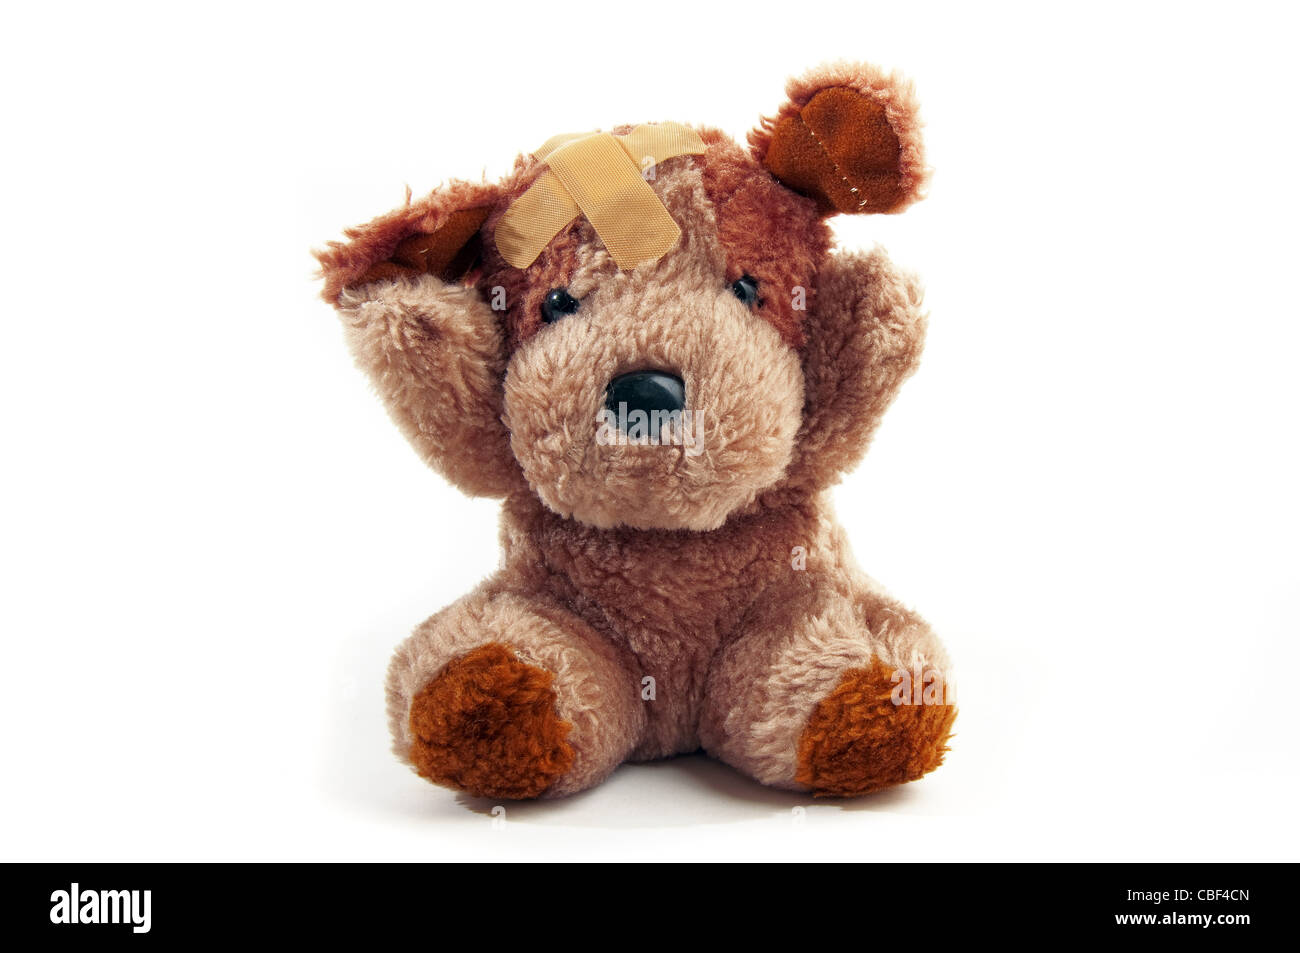 Cute little teddy bear with plaster on his head over a white background Stock Photo